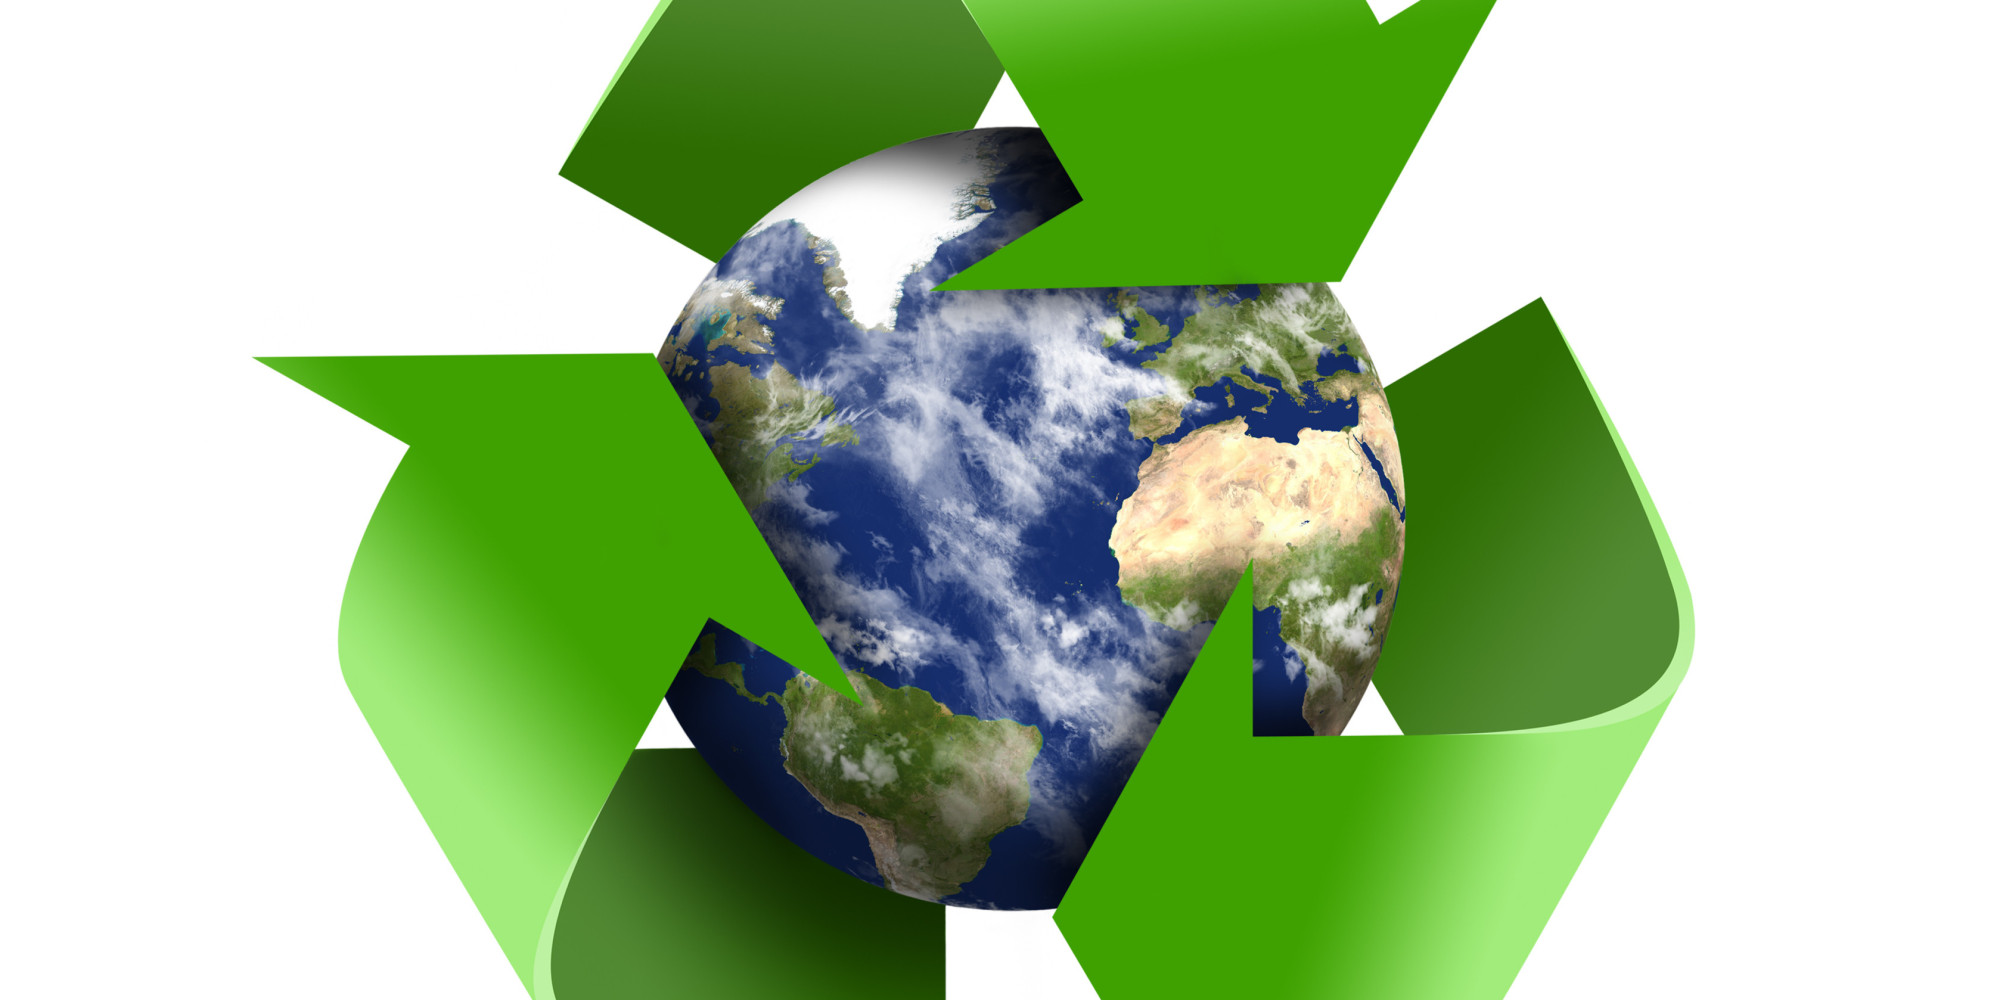 recycling-opens-the-door-to-a-circular-economy-huffpost